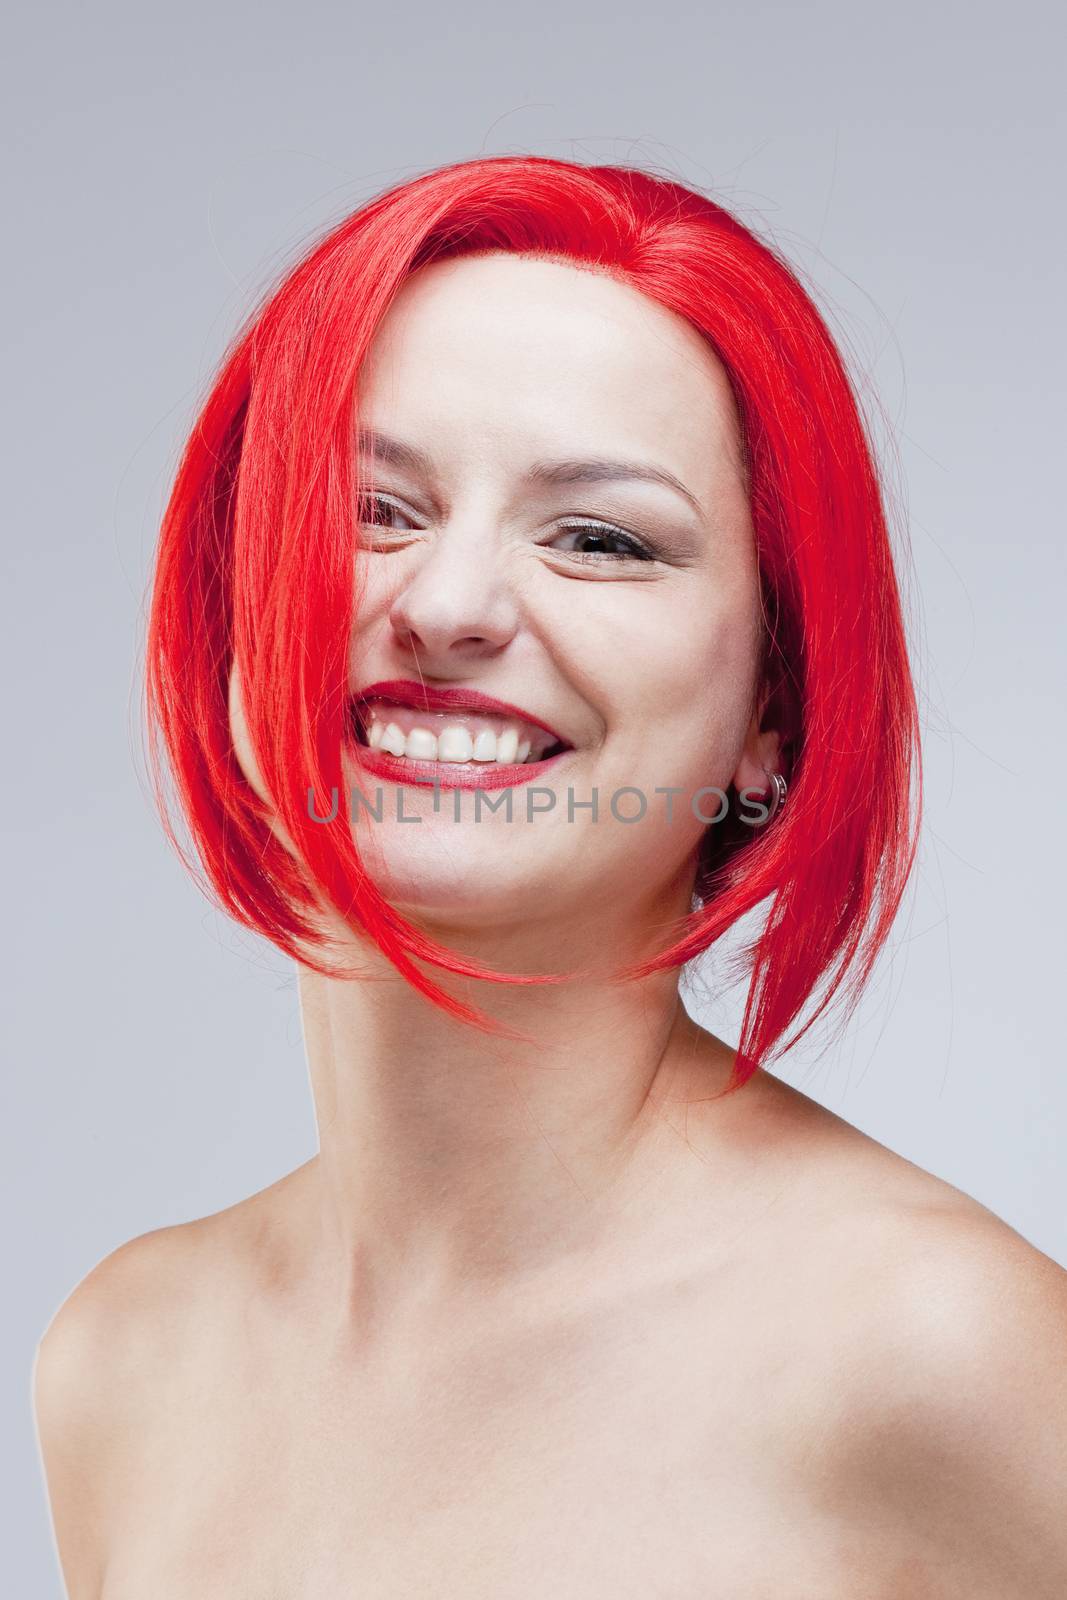 Portrait of a Young Woman in Red Wig - Isolated on Gray